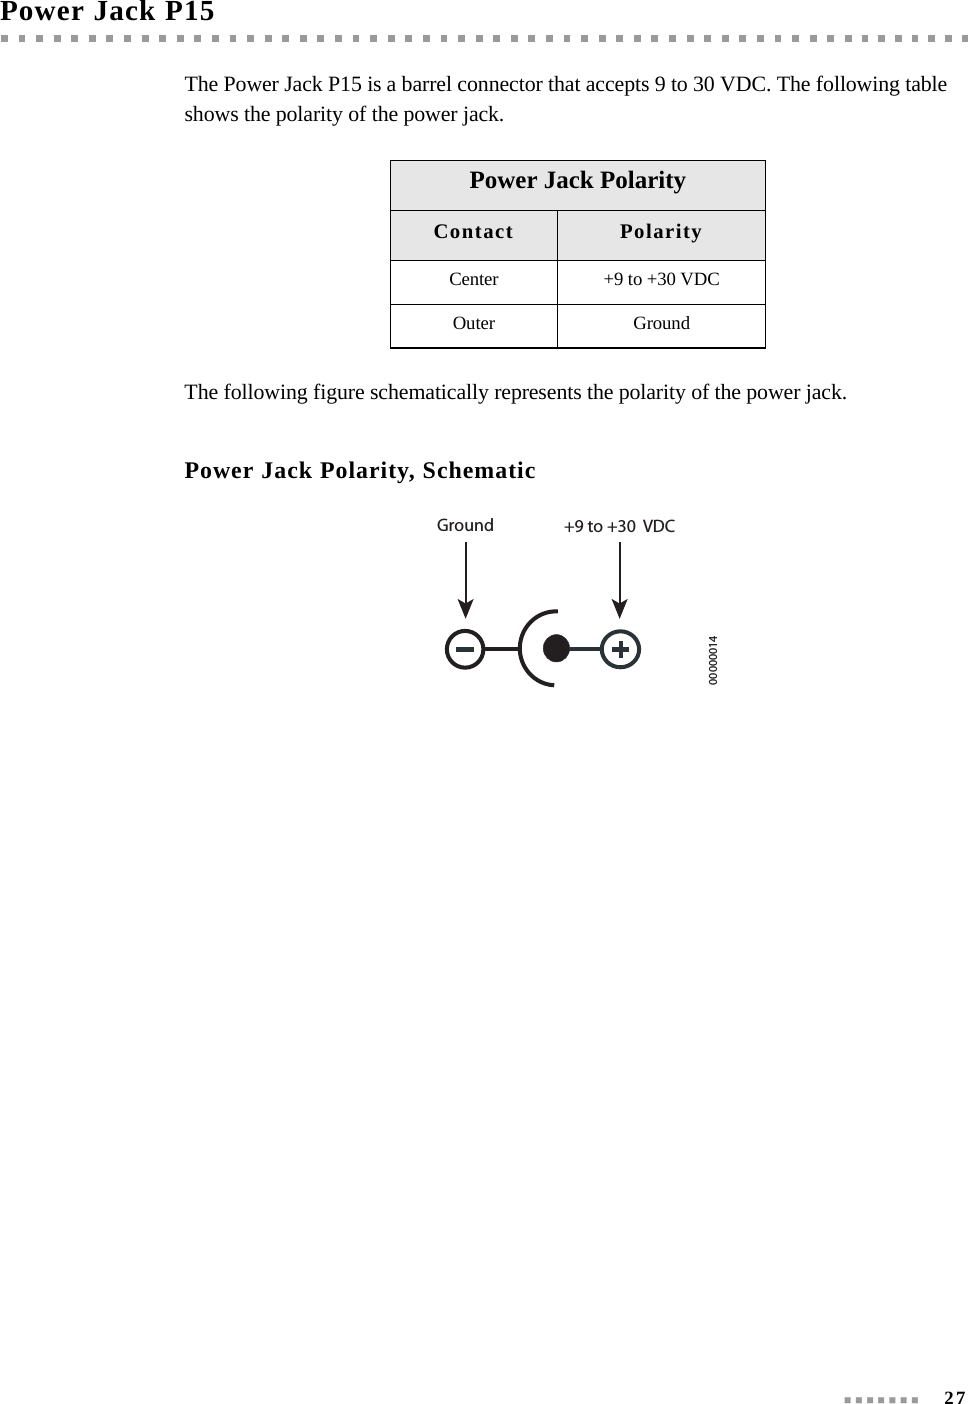  27Power Jack P15The Power Jack P15 is a barrel connector that accepts 9 to 30 VDC. The following table shows the polarity of the power jack.The following figure schematically represents the polarity of the power jack.Power Jack Polarity, SchematicPower Jack PolarityContact PolarityCenter +9 to +30 VDCOuter GroundGround +9 to +30  VDC00000014